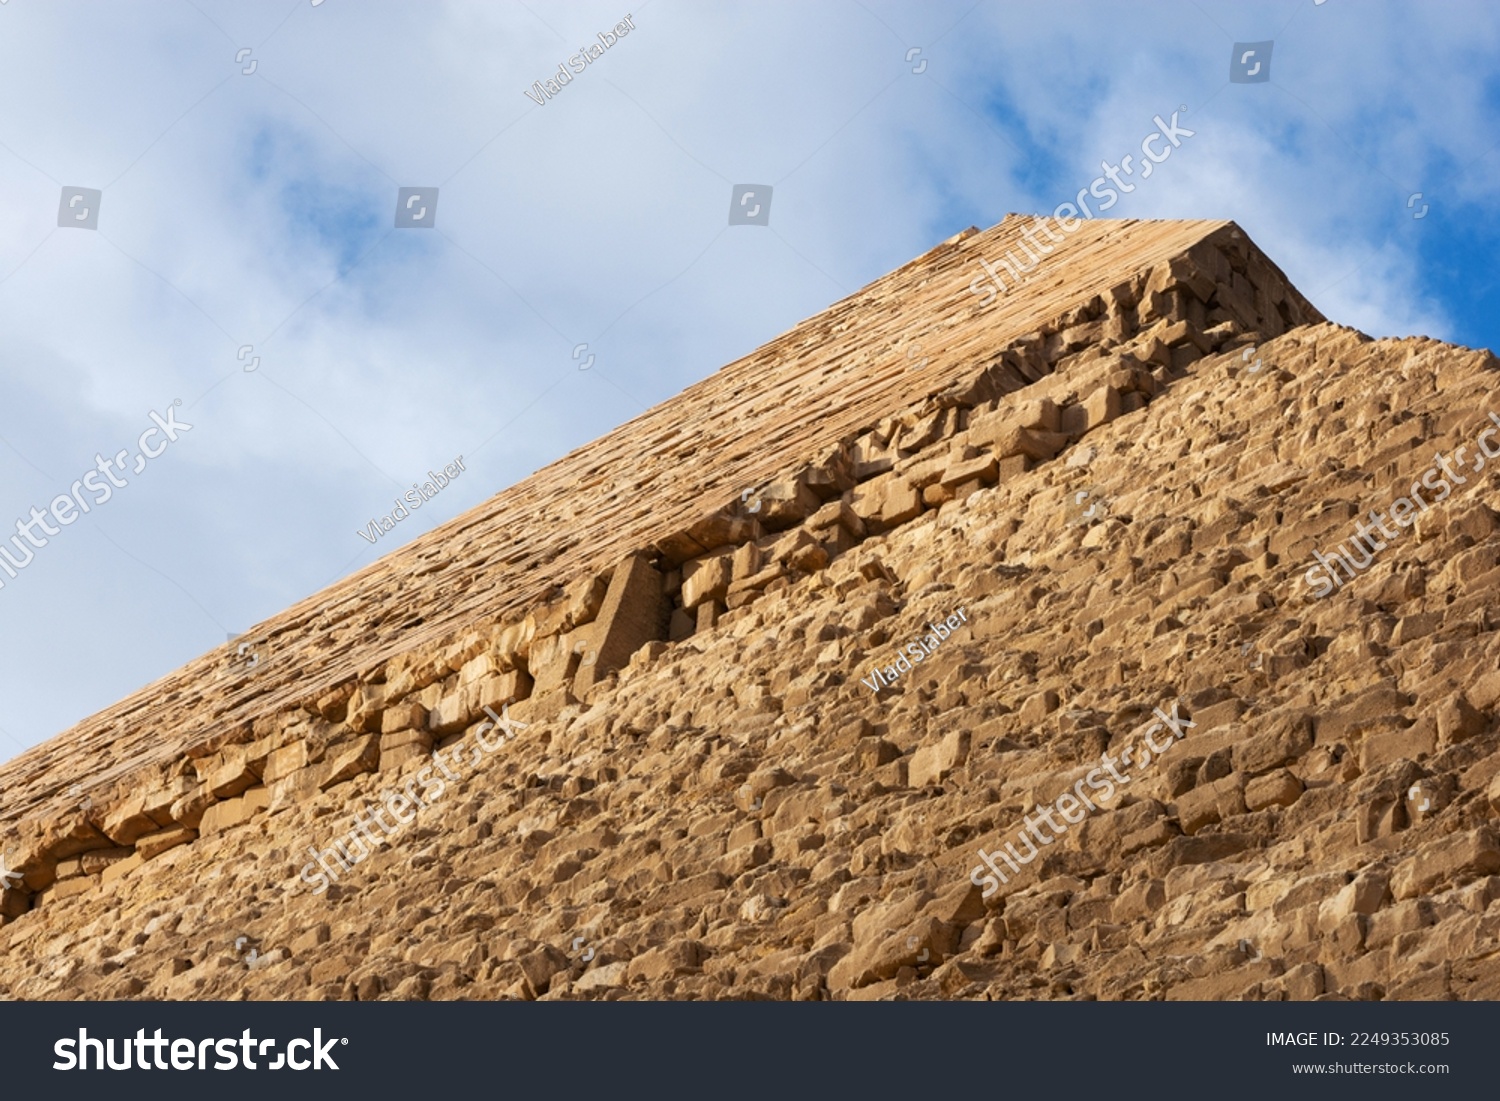 Edge of the pyramid of Khafre or of Chephren the second-tallest and second-largest of the 3 Ancient Egyptian Pyramids of Giza and the tomb of the Fourth-Dynasty pharaoh Khafre (Chefren) #2249353085